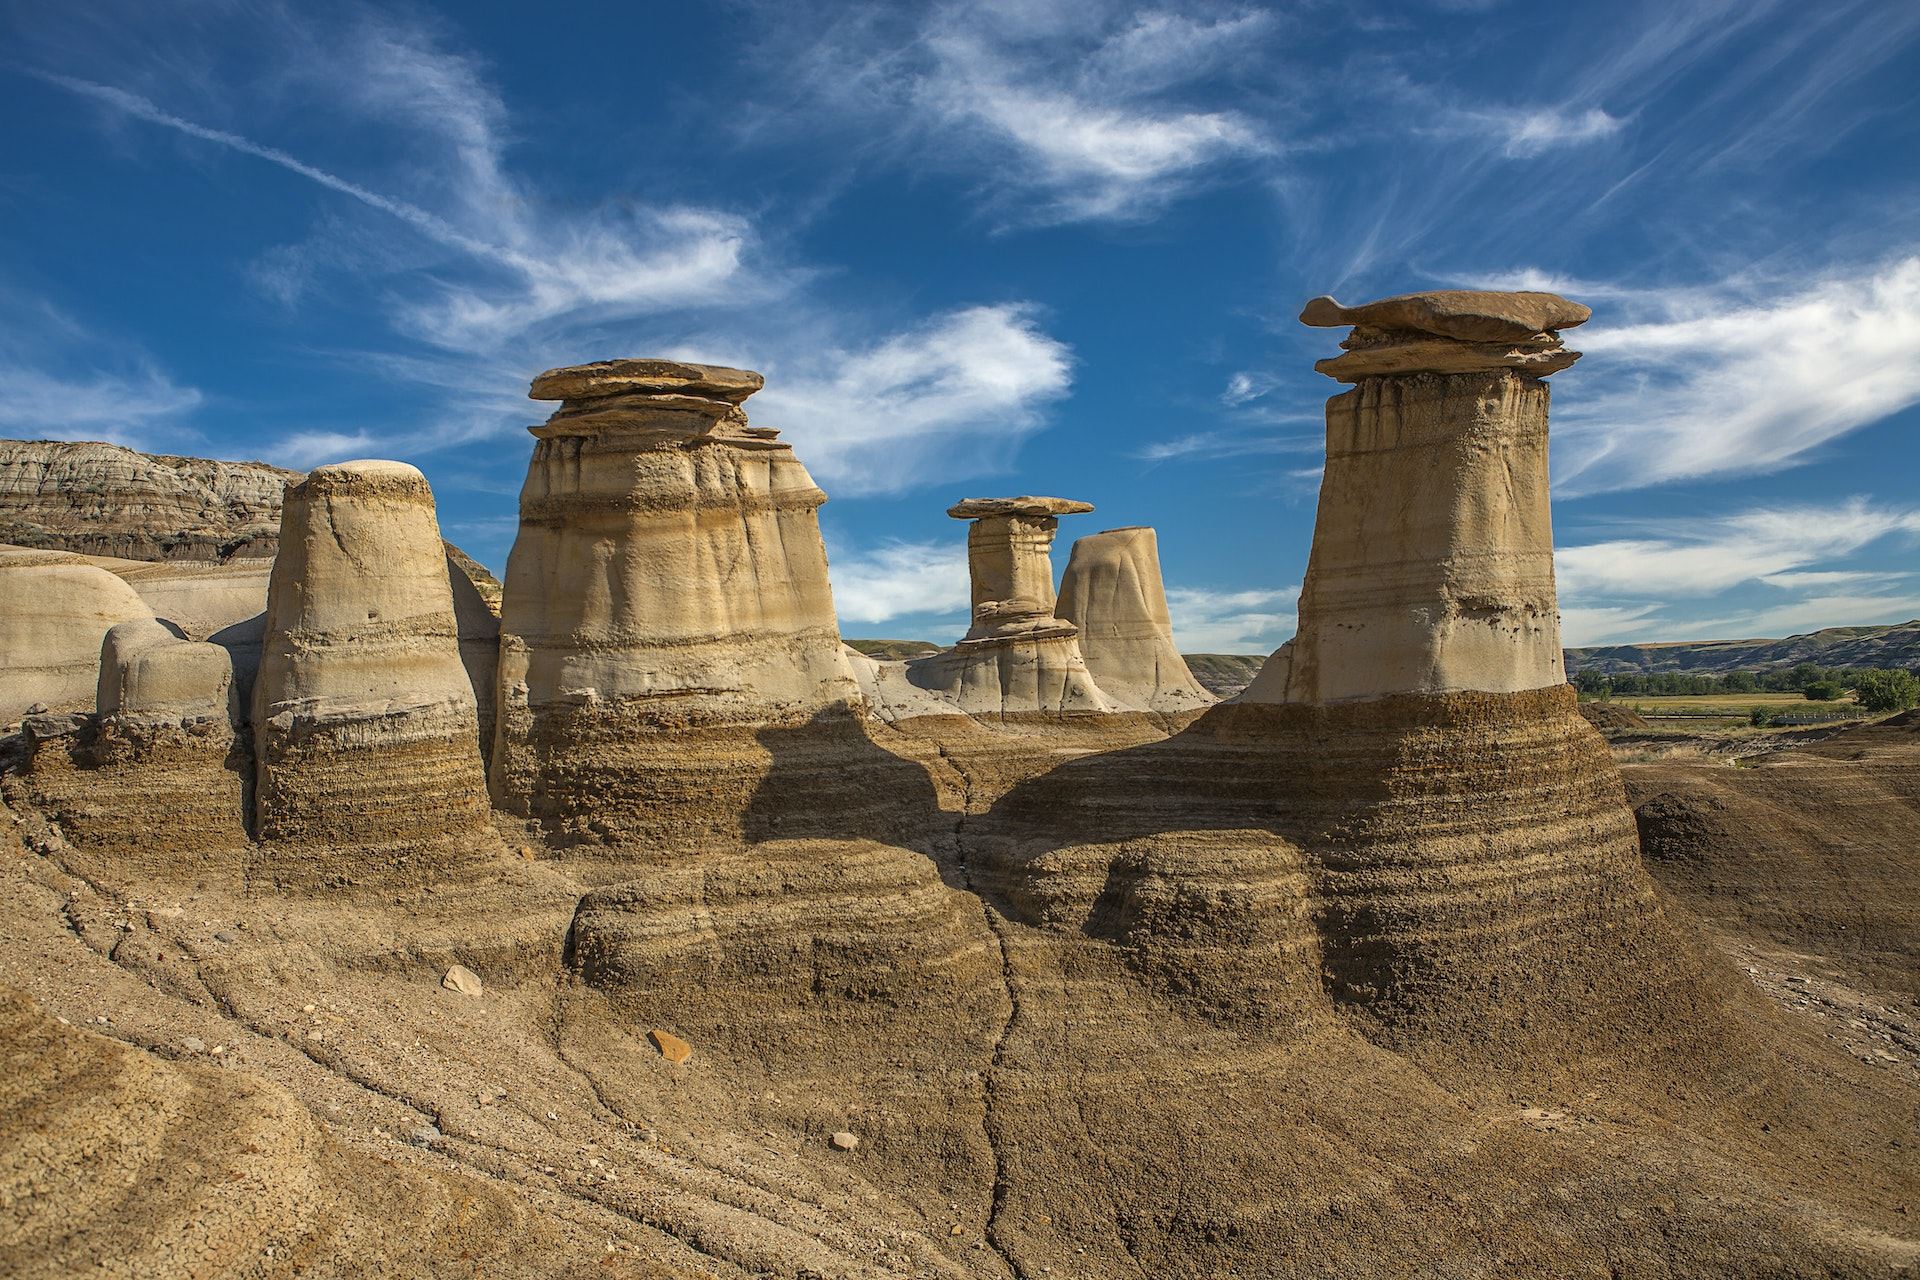 Geological wind-sculptured rock formations stand against a blue sky in the Drumheller badlands, Canada.